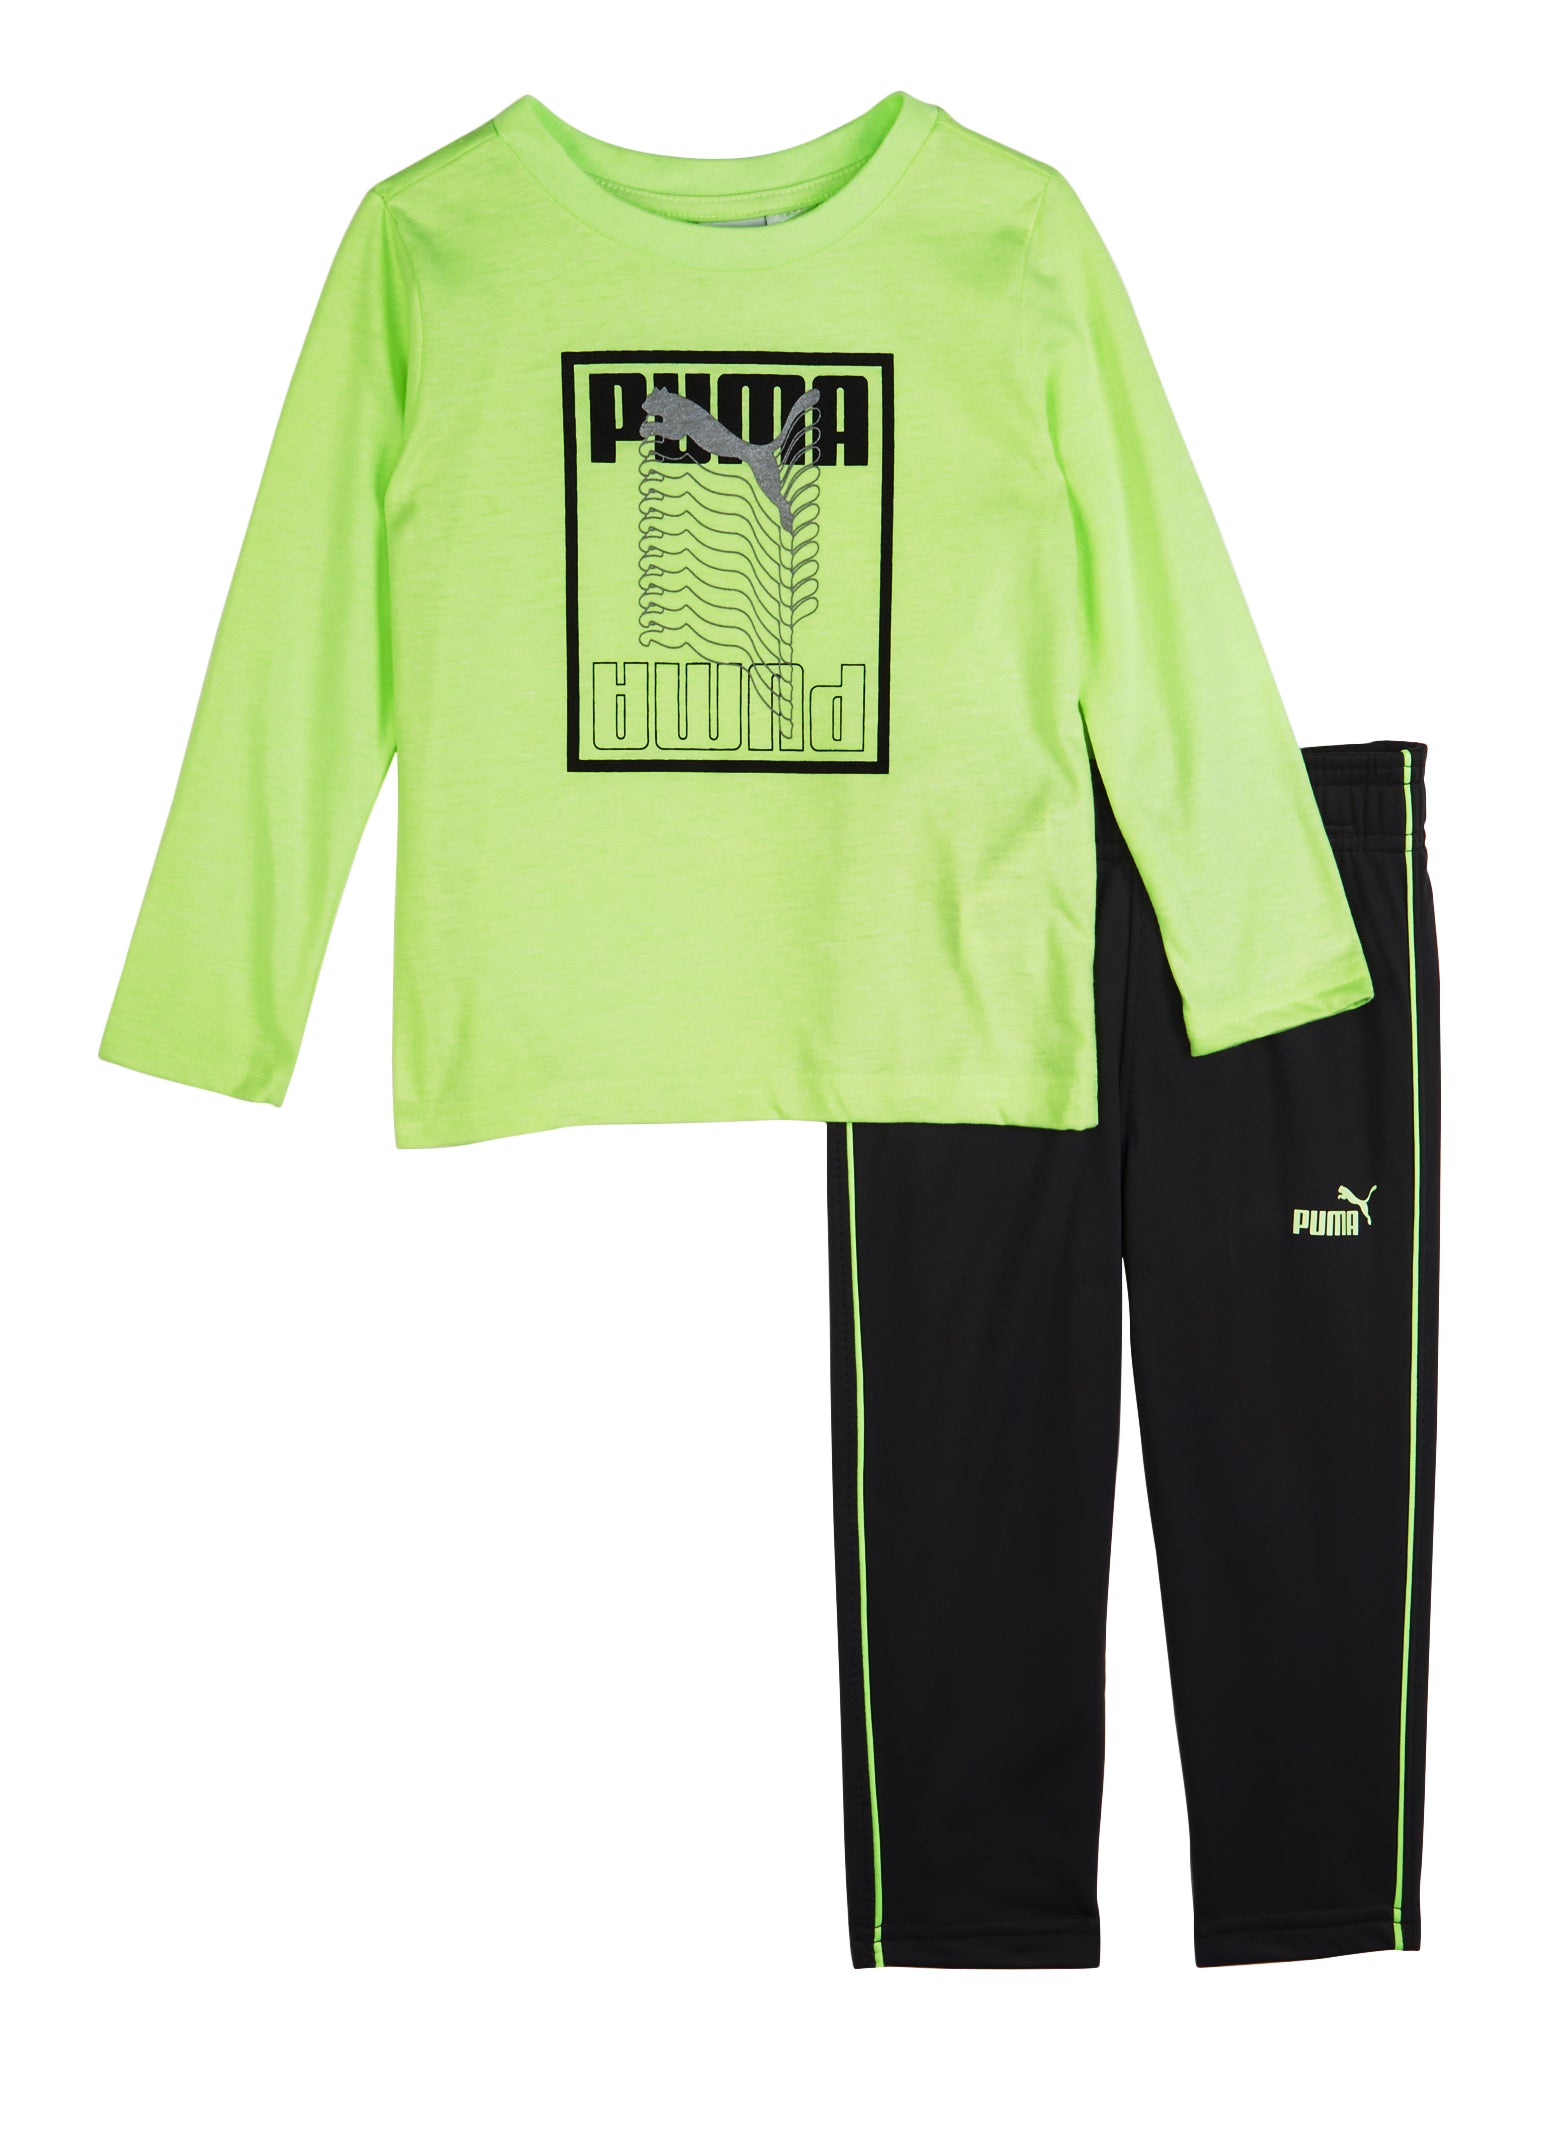 Toddler Boys Puma Graphic Tee and Track Pants - Neon Lime